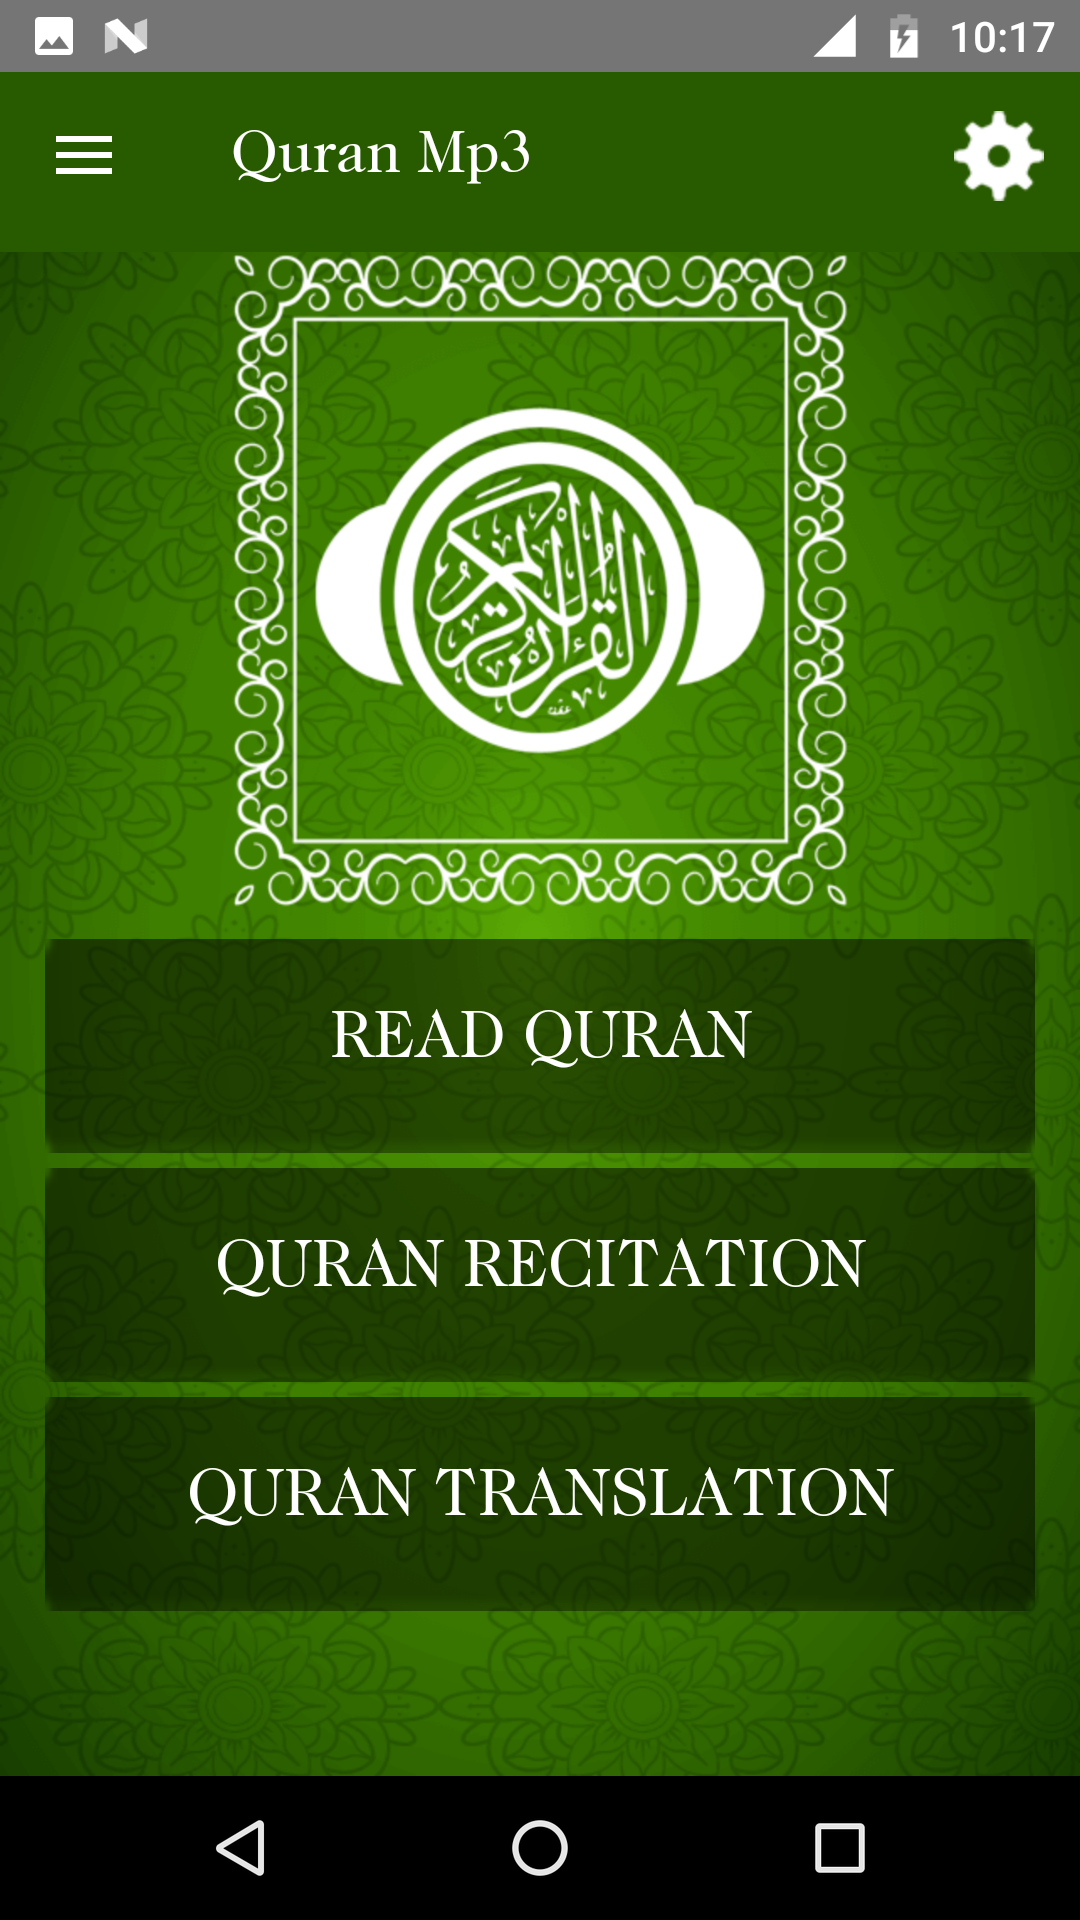 Quran MP3 Audio & Translation APK 8.0 for Android – Download Quran MP3  Audio & Translation XAPK (APK Bundle) Latest Version from APKFab.com